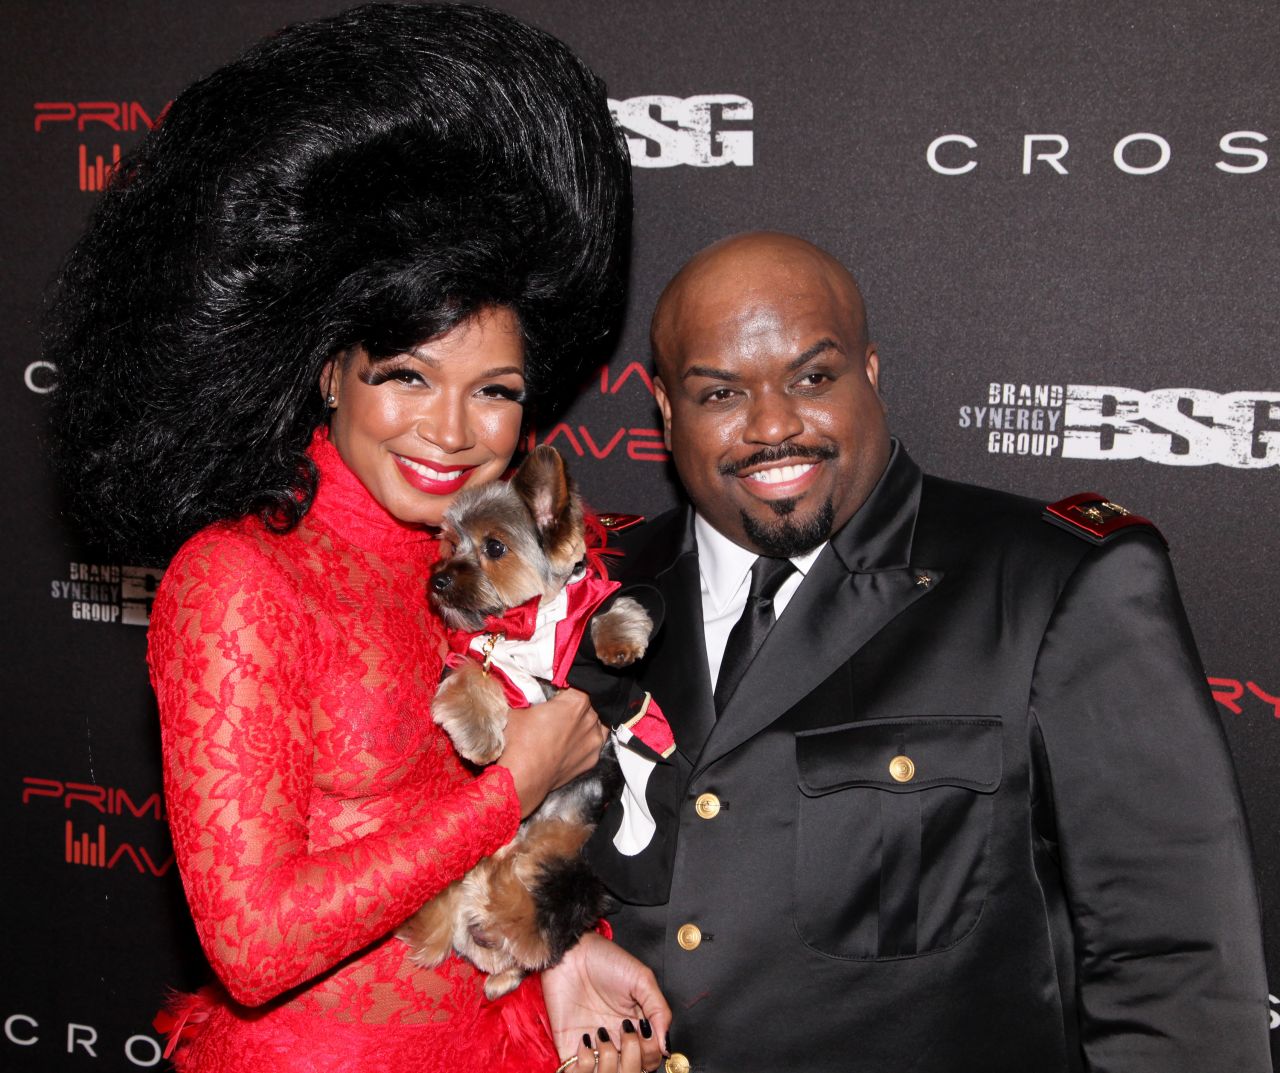 Musician Cee Lo Green and Shani James are engaged. Theyconfirmed the happy news to <a href="http://www.people.com/article/cee-lo-green-engaged" target="_blank" target="_blank">People magazine</a>. "Maybe it is time for the world to know that I have a very secure situation and a loving woman supporting me the entire way," Green said. 